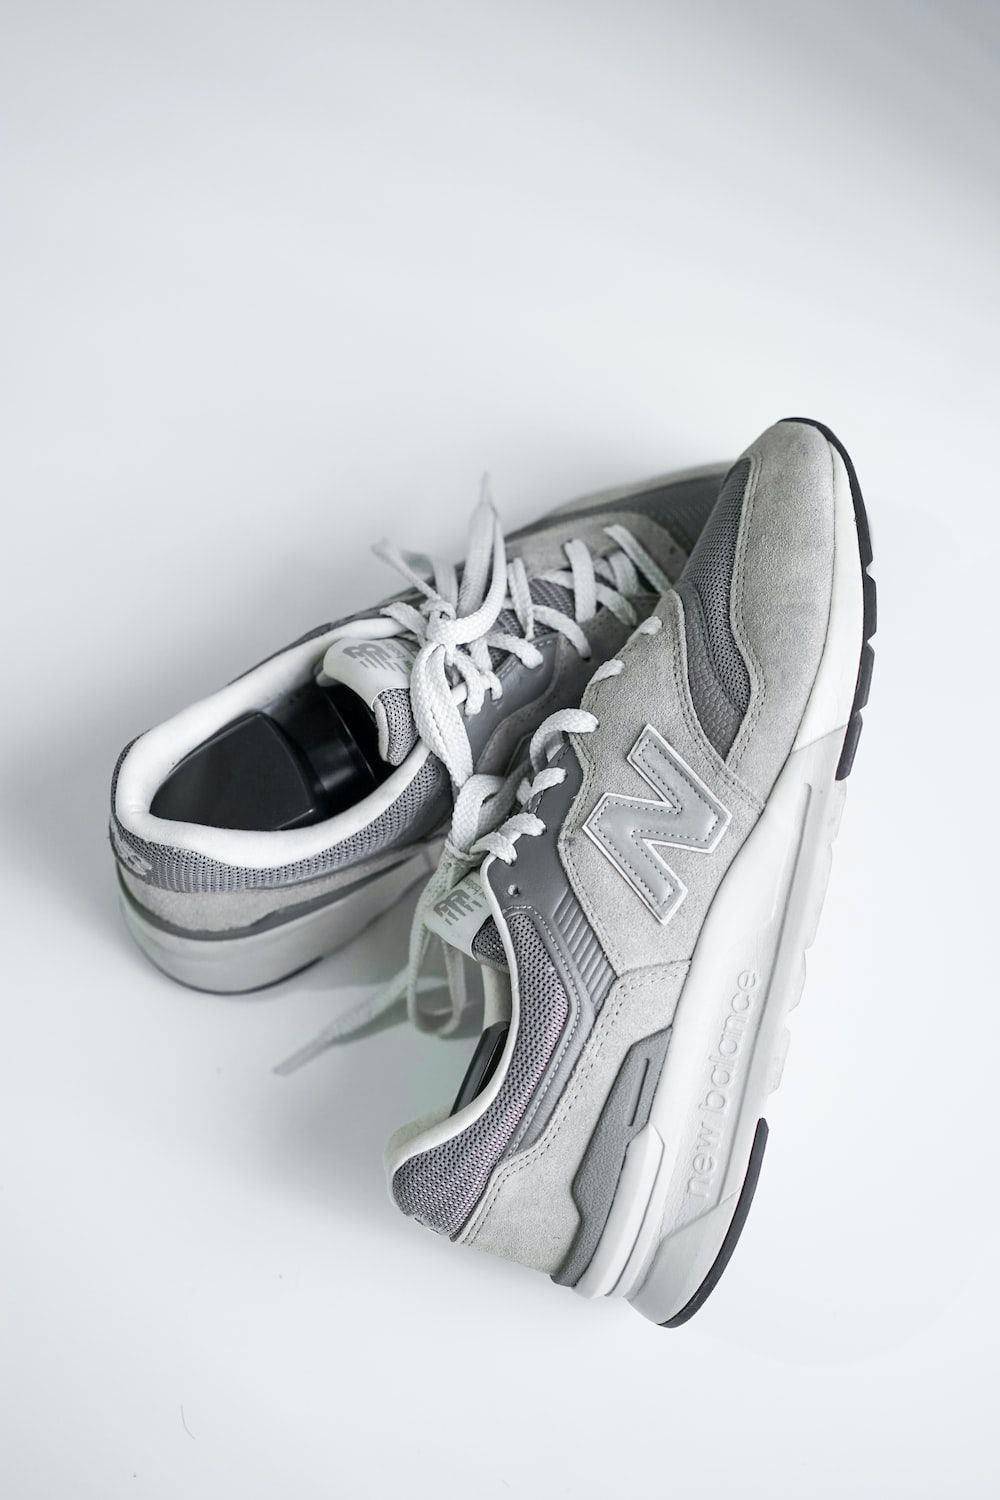 New Balance Picture. Download Free Image